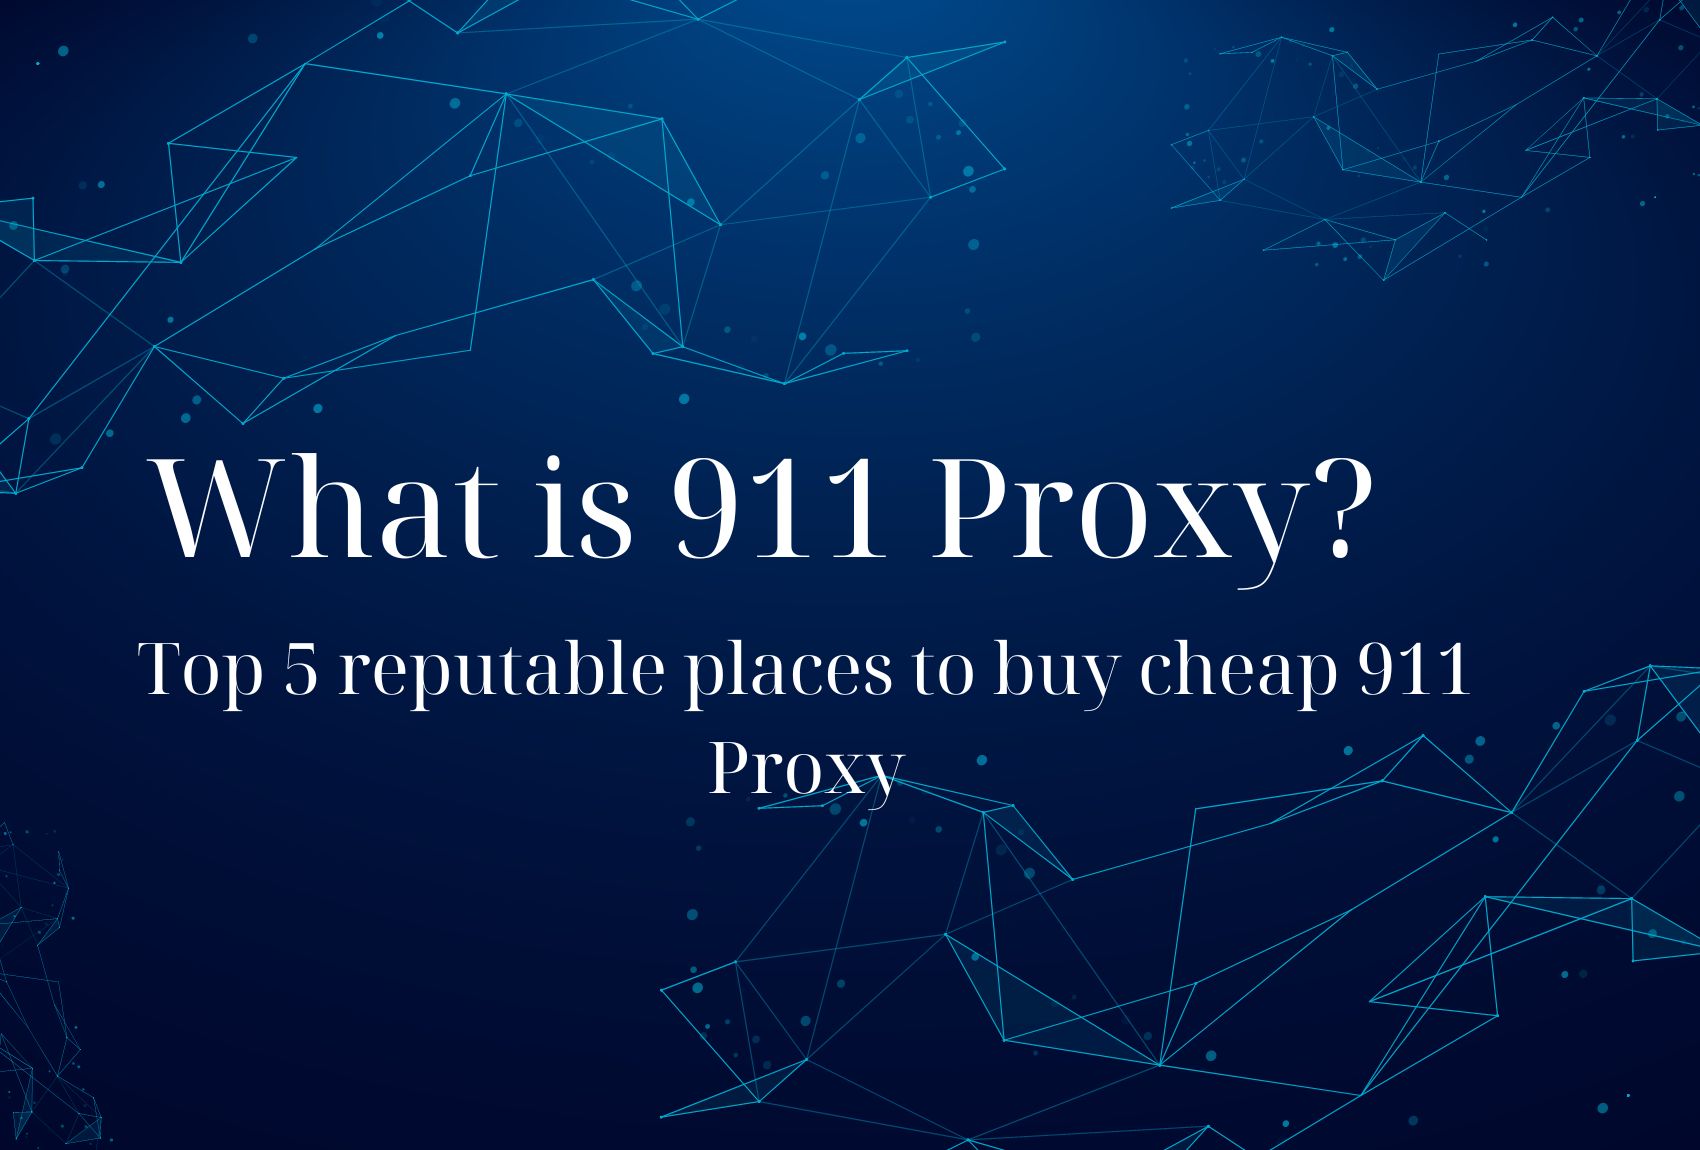 What is 911 Proxy? Top 5 reputable places to buy cheap 911 Proxy